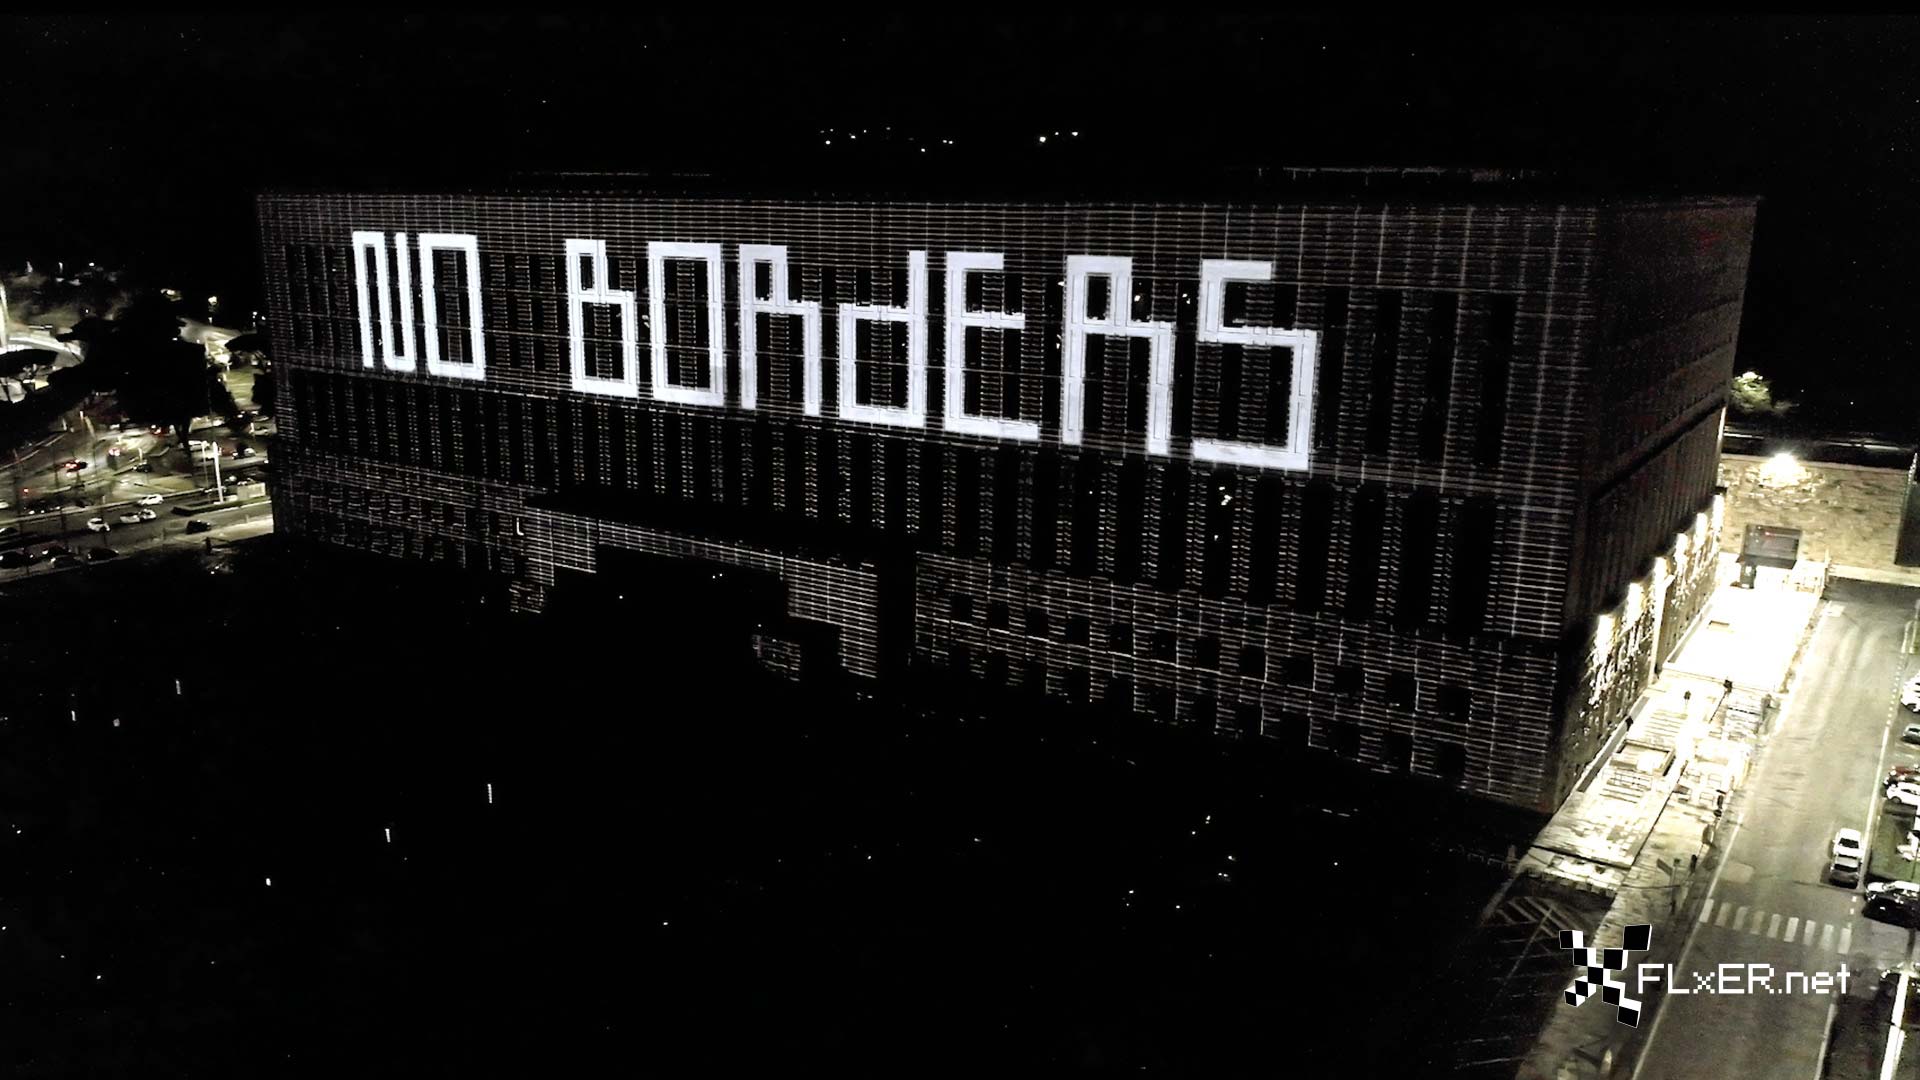 Image for: FLxER: No Borders